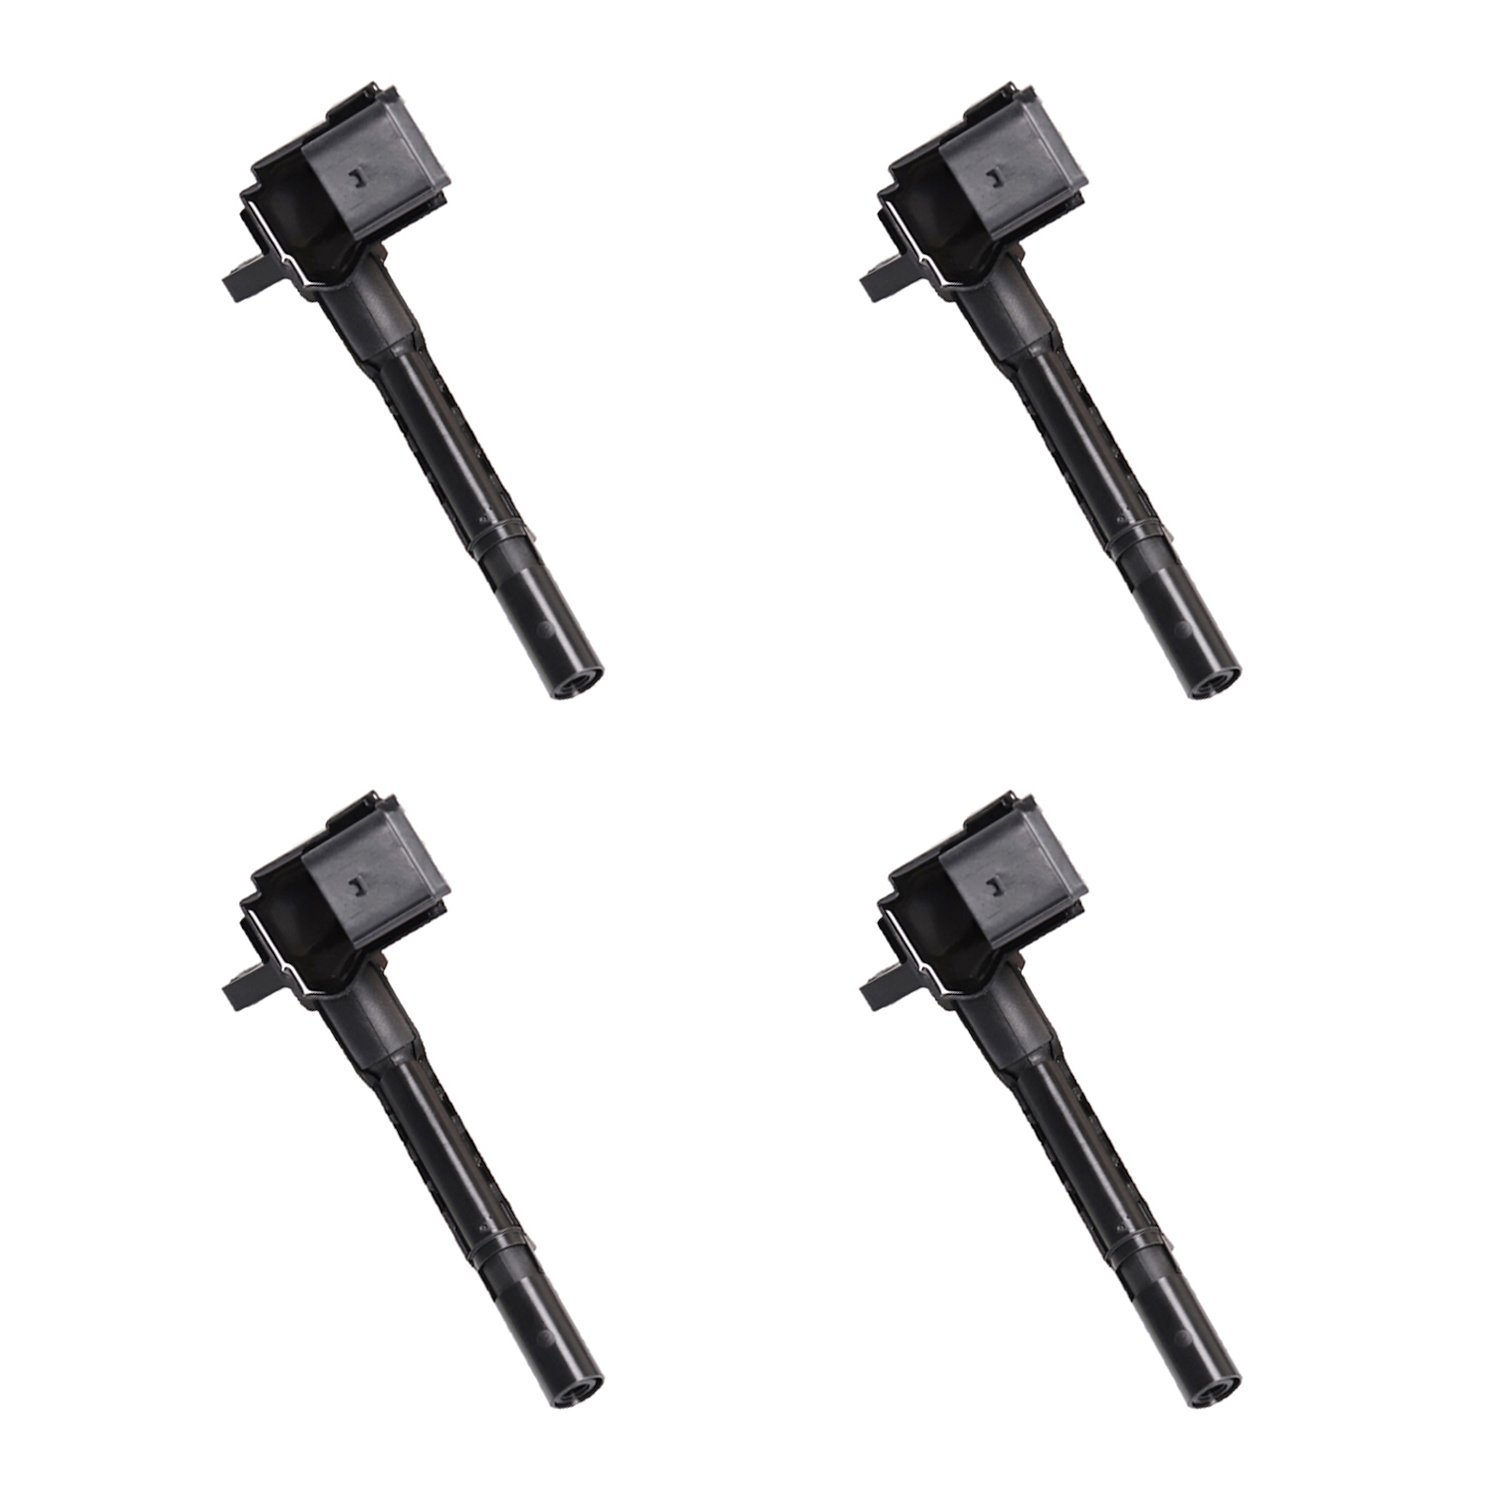 OE Replacement Ignition Coils for Mercedes-Benz C300 CLA250 E300 2.0L